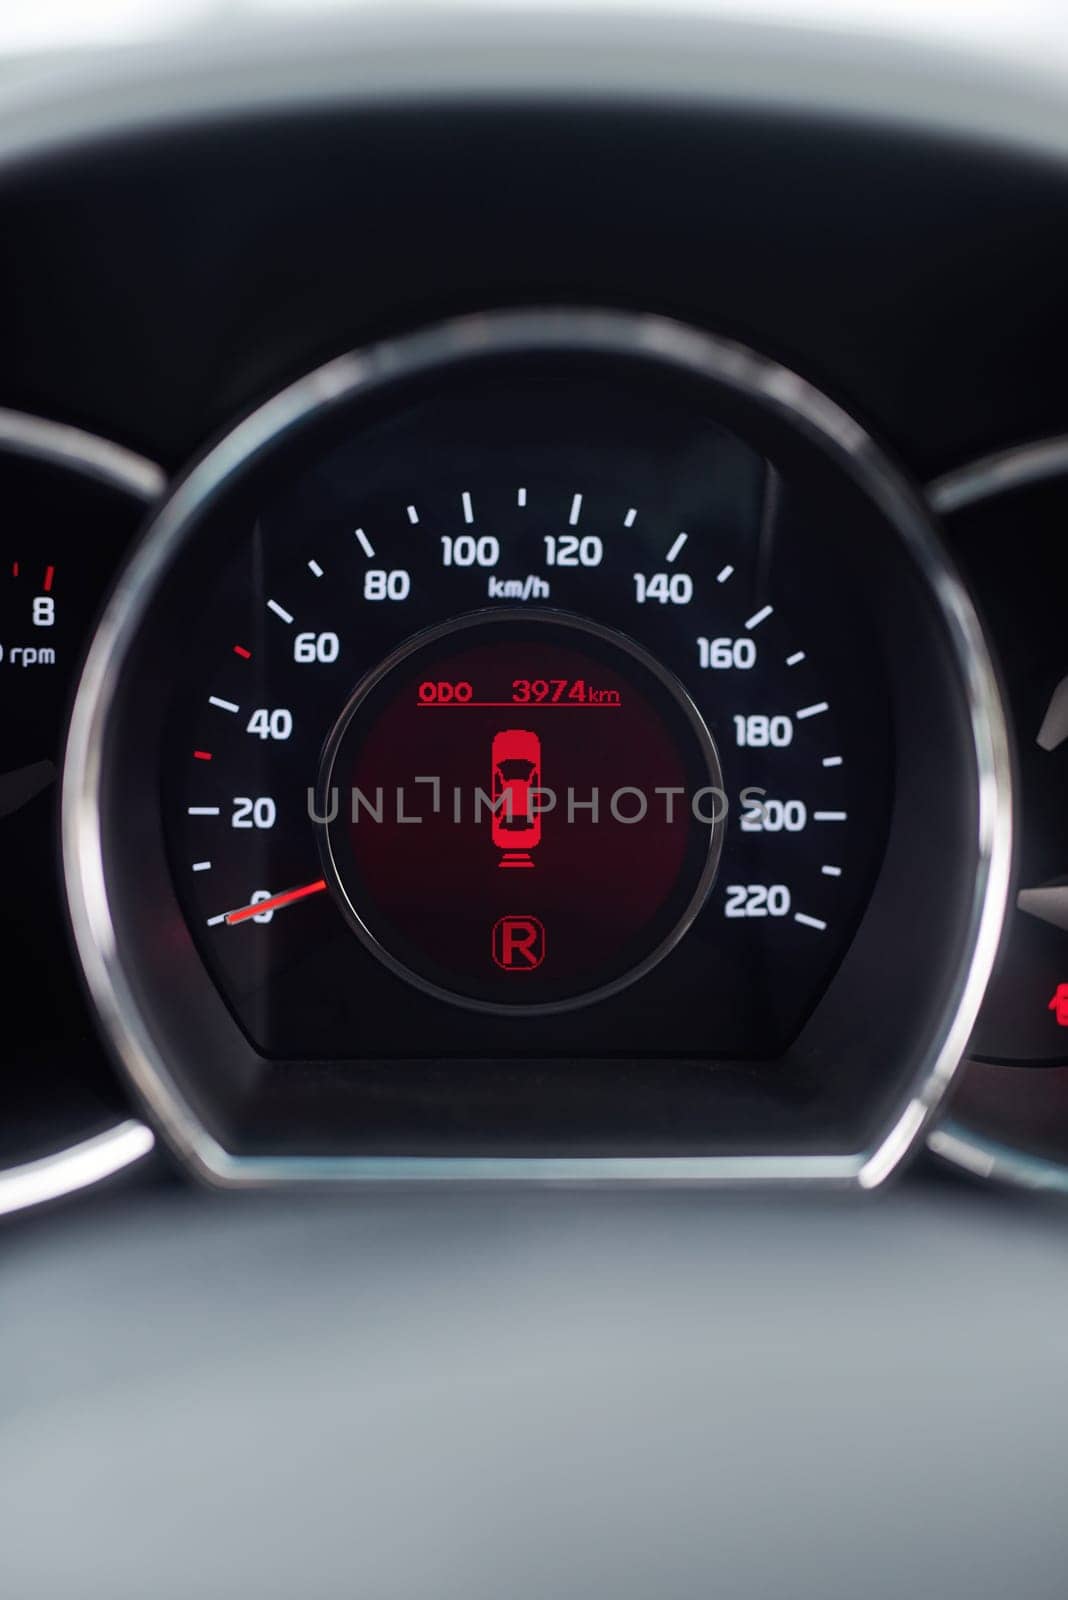 Dashboard, reverse and speedometer of car for information, safety or travel with lights closeup. Automobile, transportation and system display on vehicle interior for drive, journey or road trip by YuriArcurs